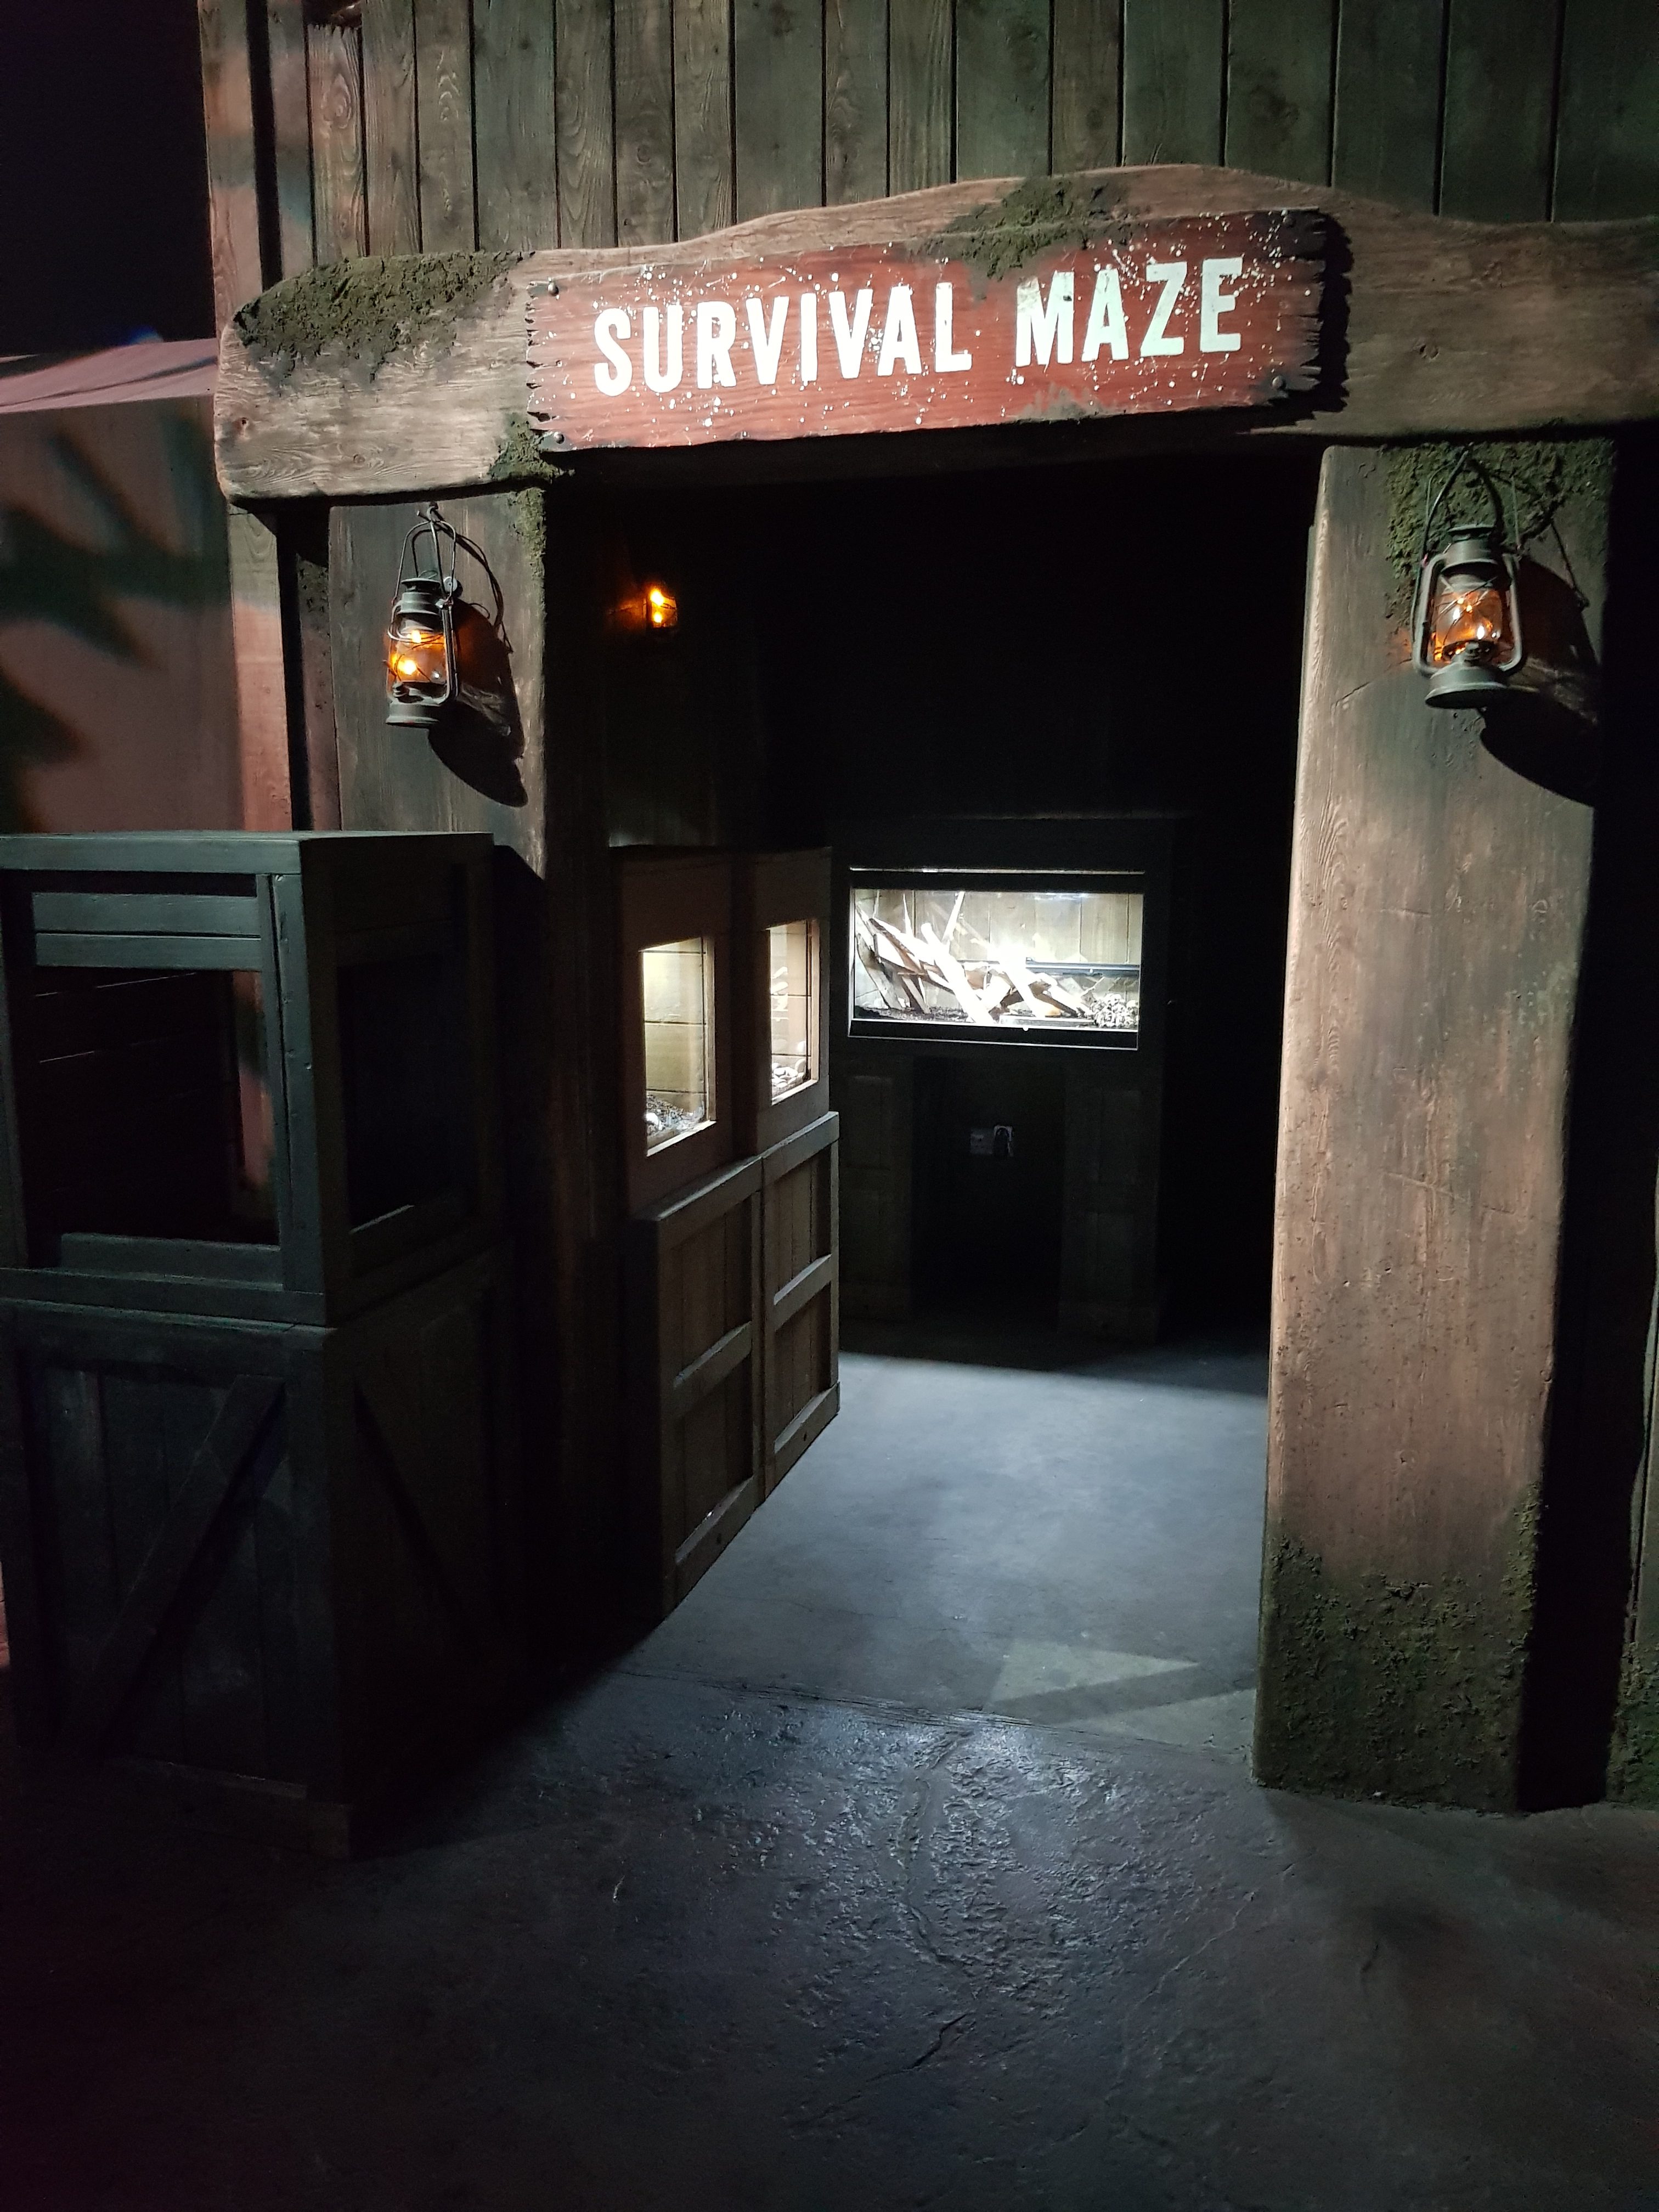 The Bear Grylls Adventure. Adrenaline Rush Activities. Survival Maze. A wooden door frame with SURVIVAL MAZE written above in white. On the door posts are old fashioned mining lanterns and through the door way you can see animal tanks.